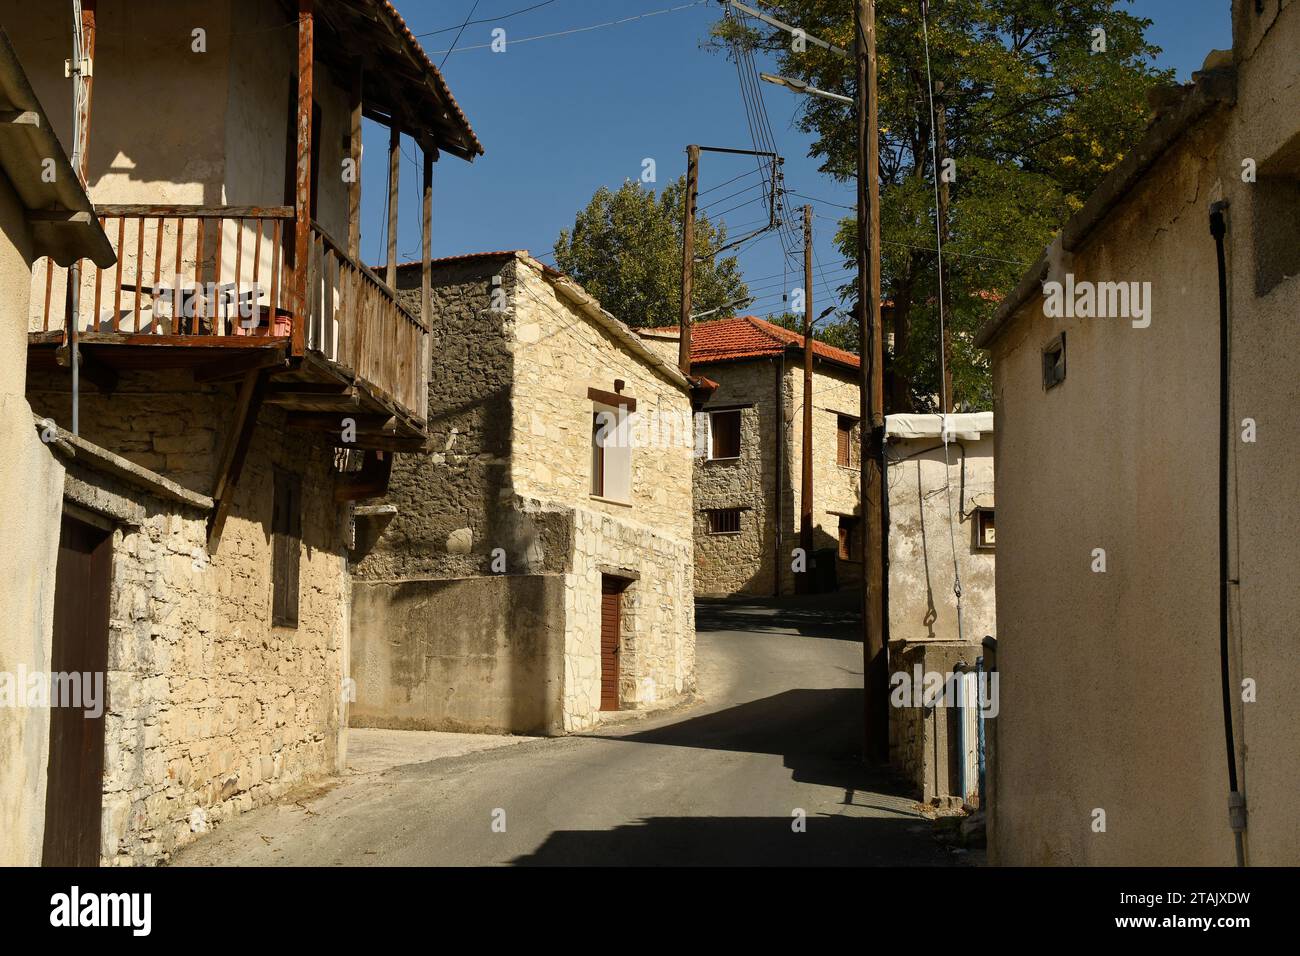 Cyprus, narrow street in the mountain village of Omodos in the Troodos mountains, houses in traditional construction with wooden balcony, Stock Photo